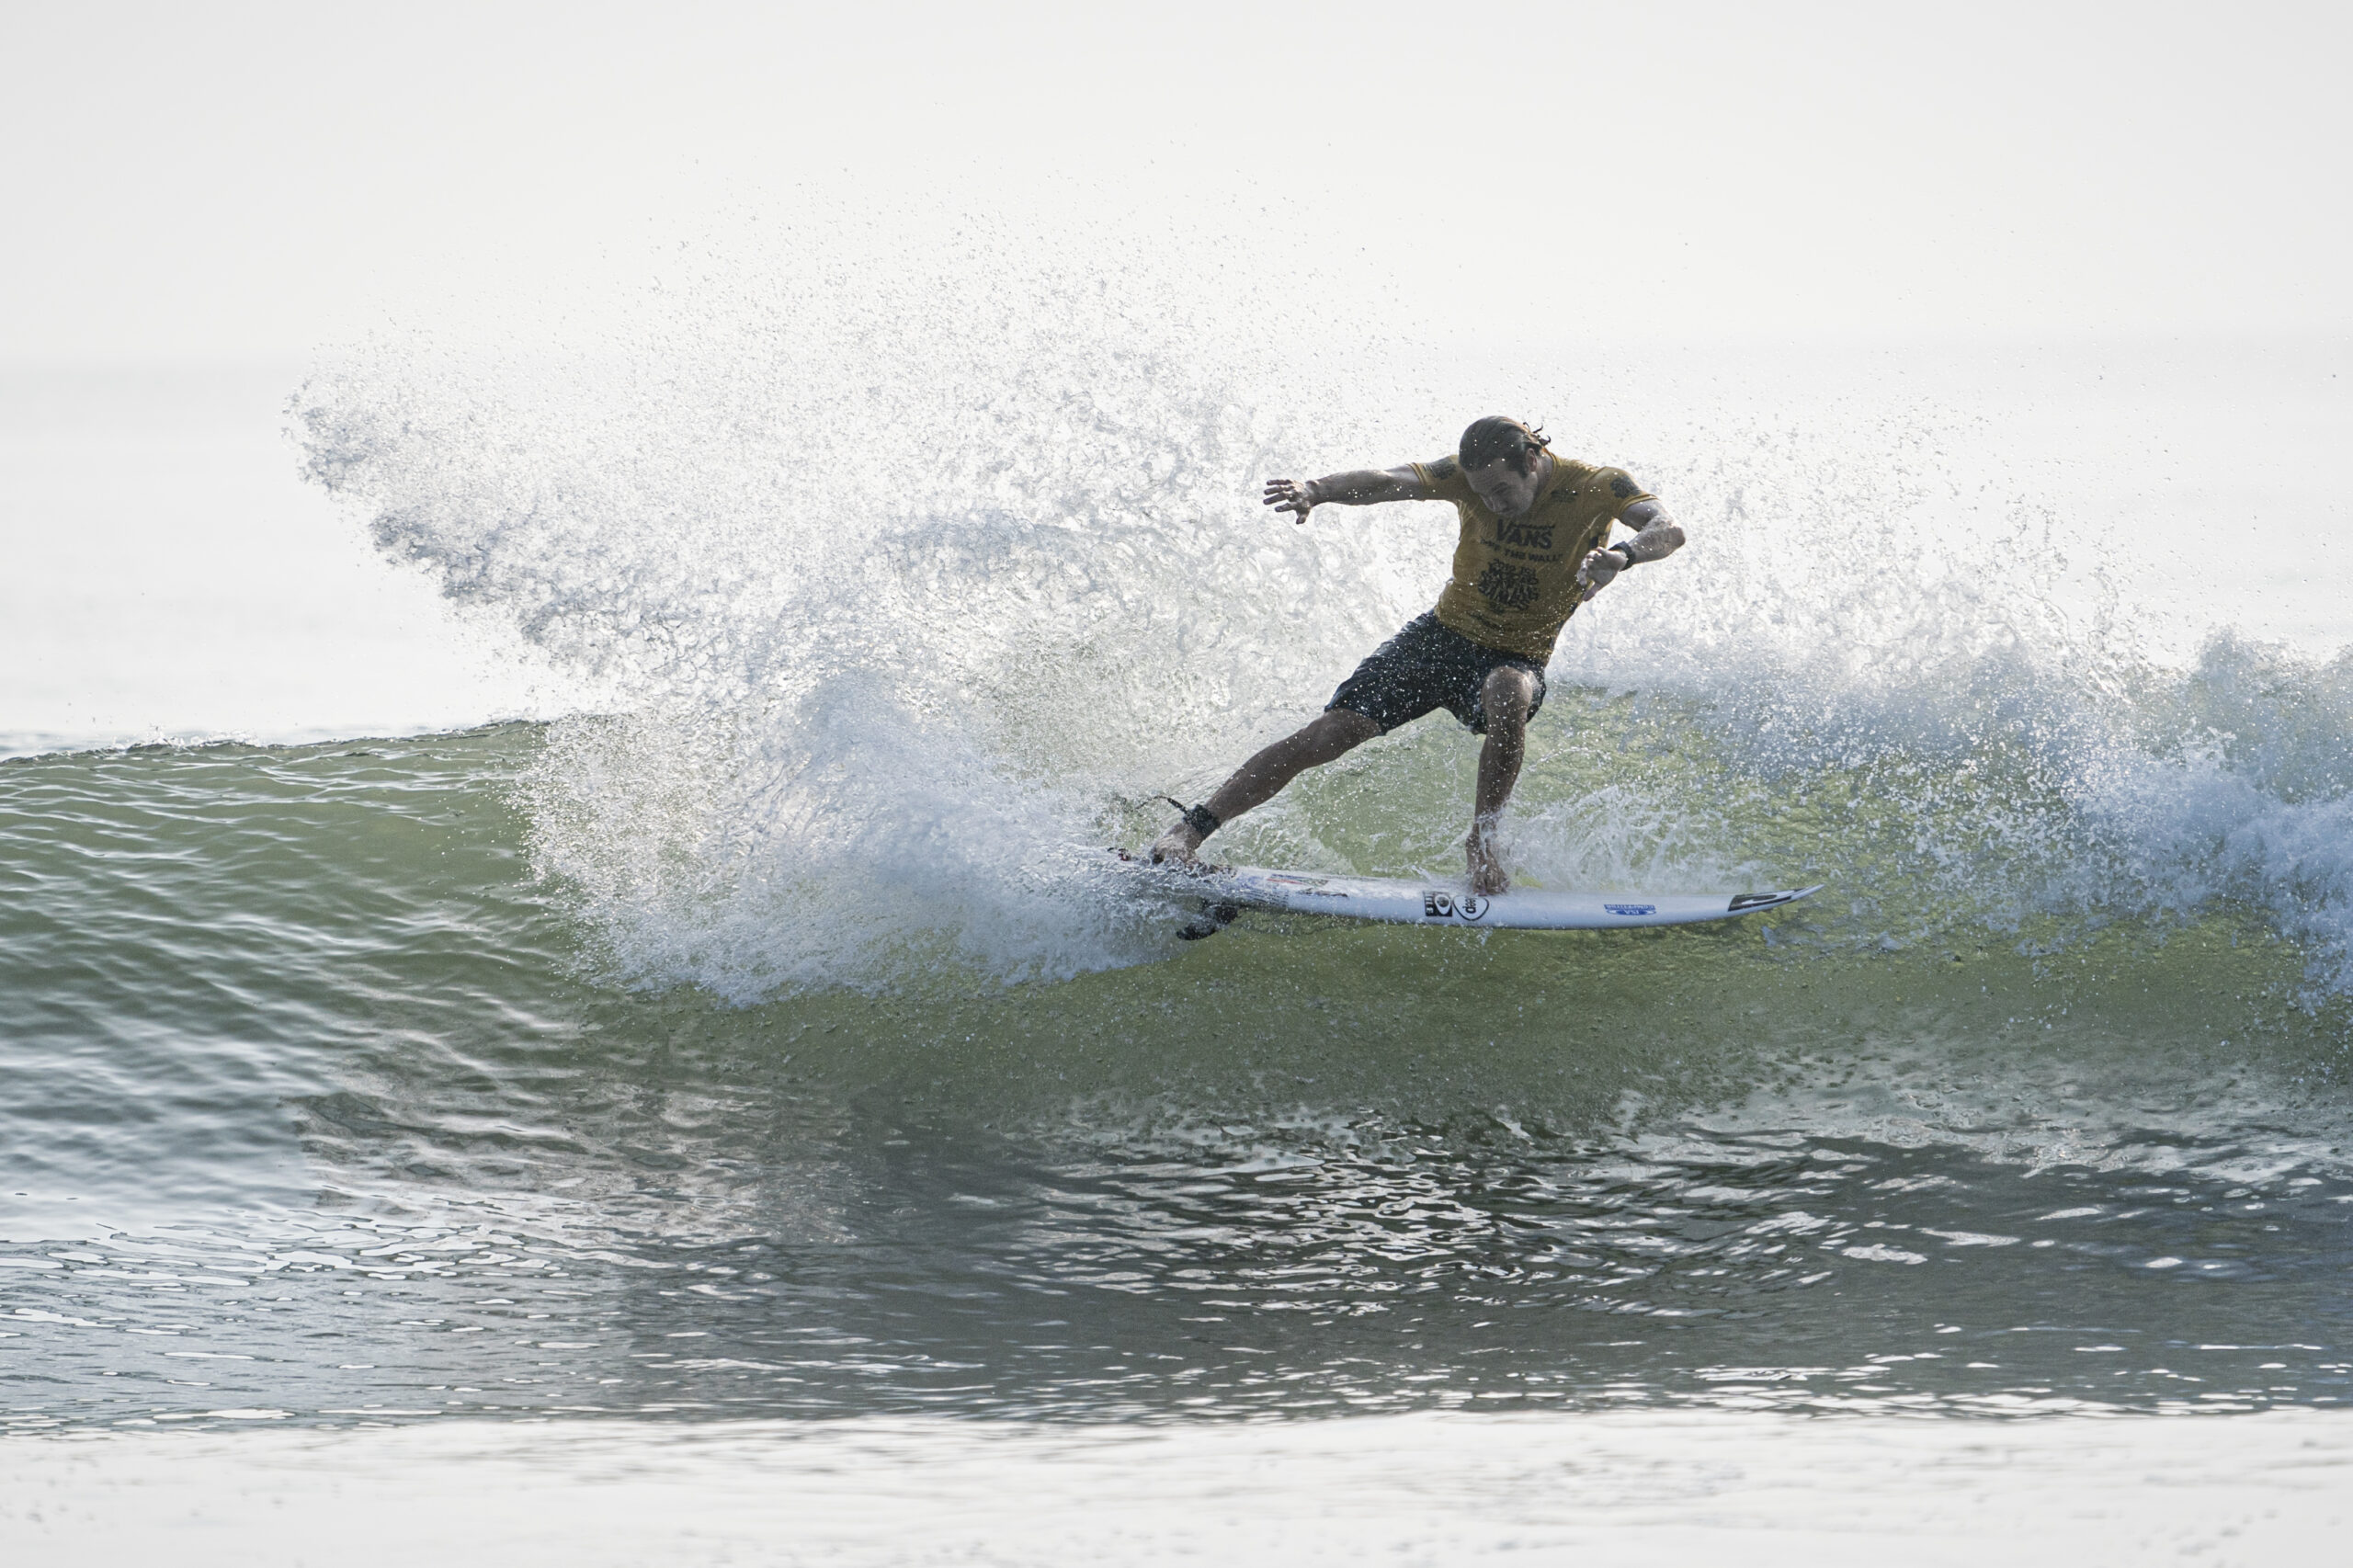 With No 2020 Olympics, How’re the Surfers Feeling? – Surfline.com Surf News